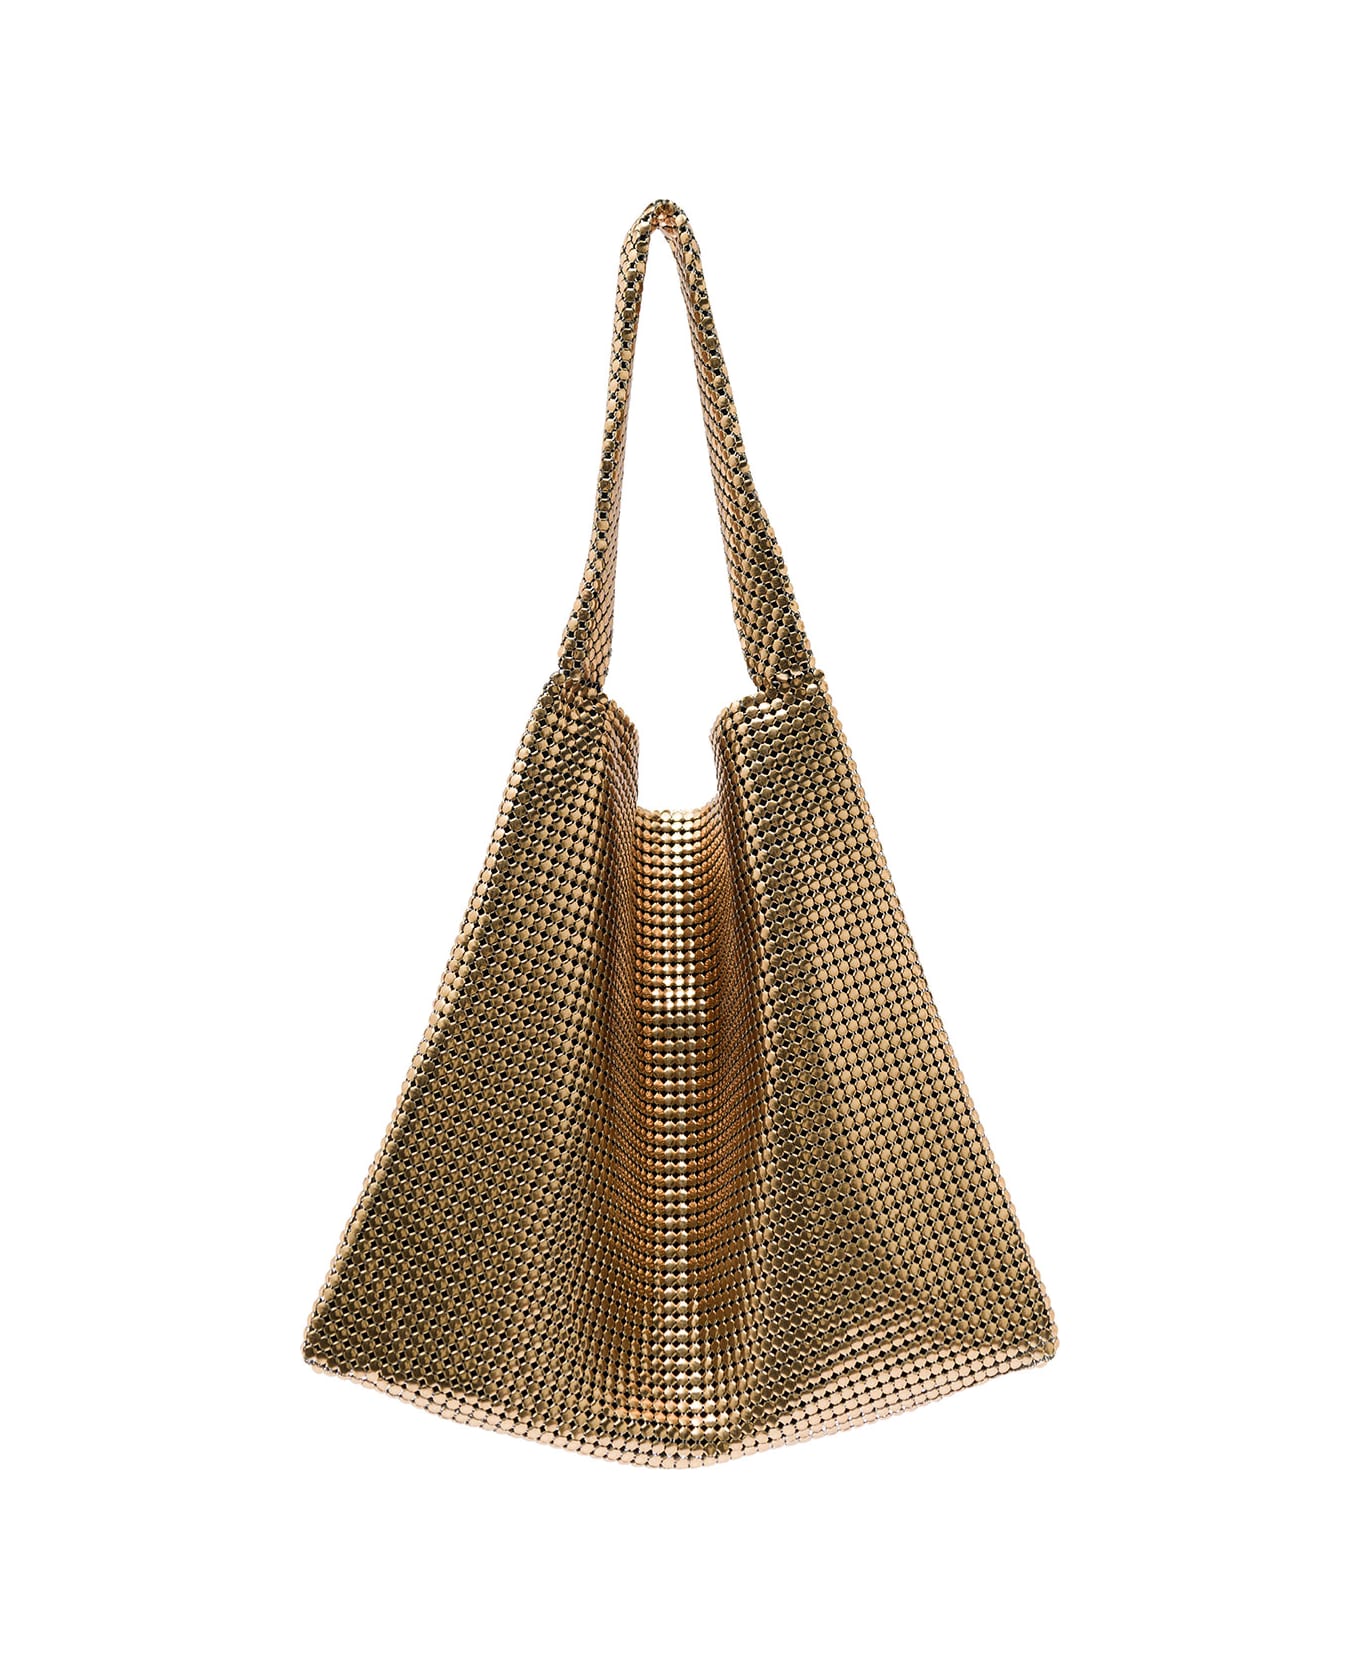 Paco Rabanne Pixel Tote - gold